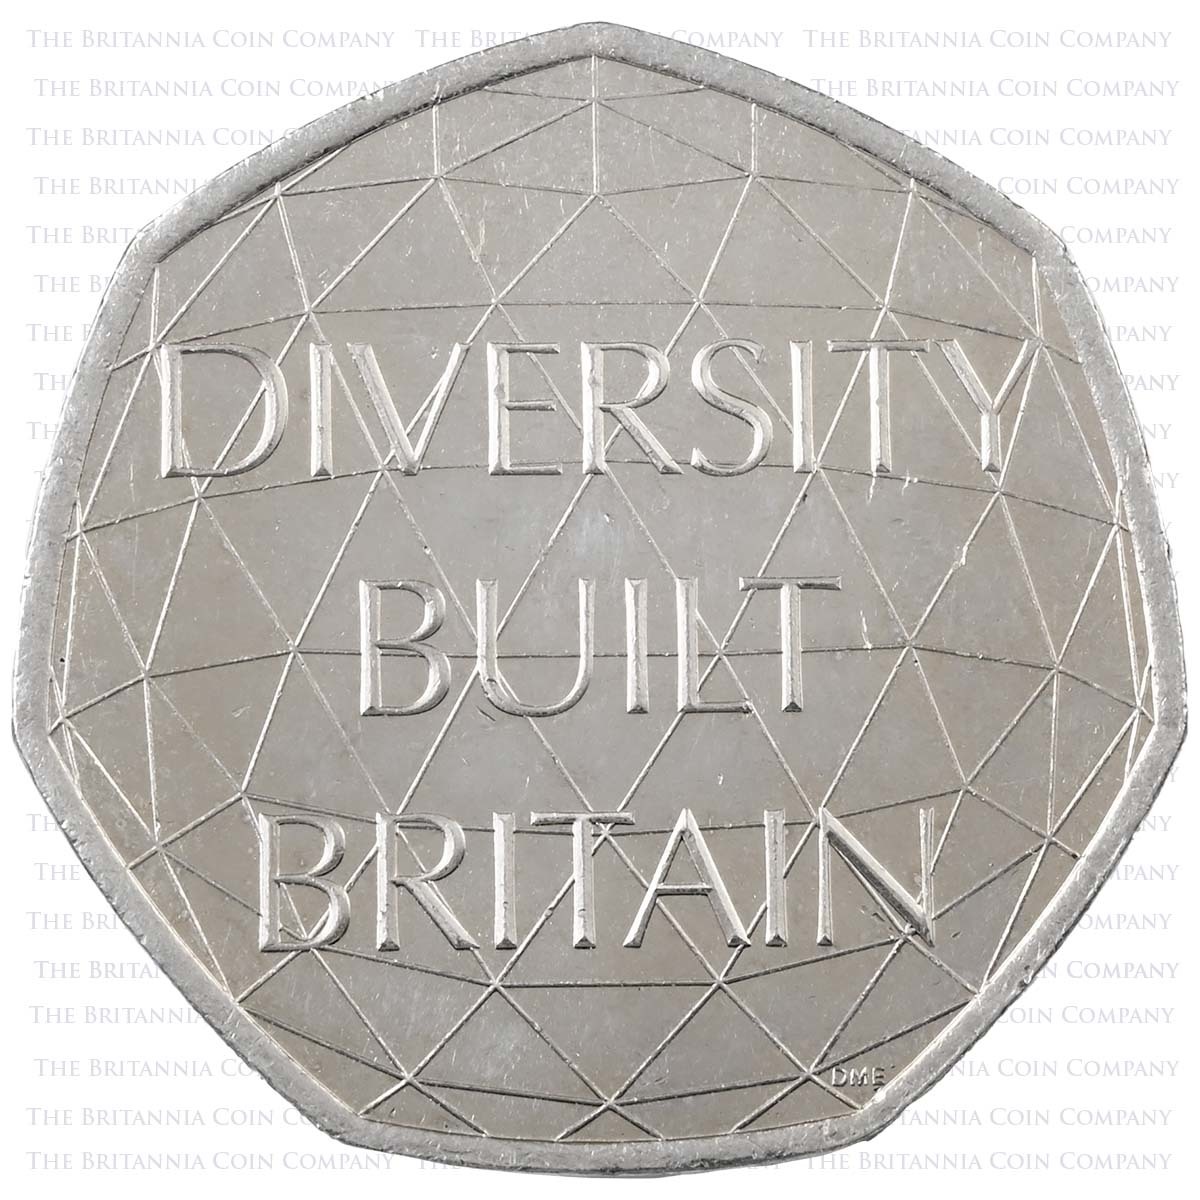 2020 Diversity Built Britain Circulated Fifty Pence Coin Reverse